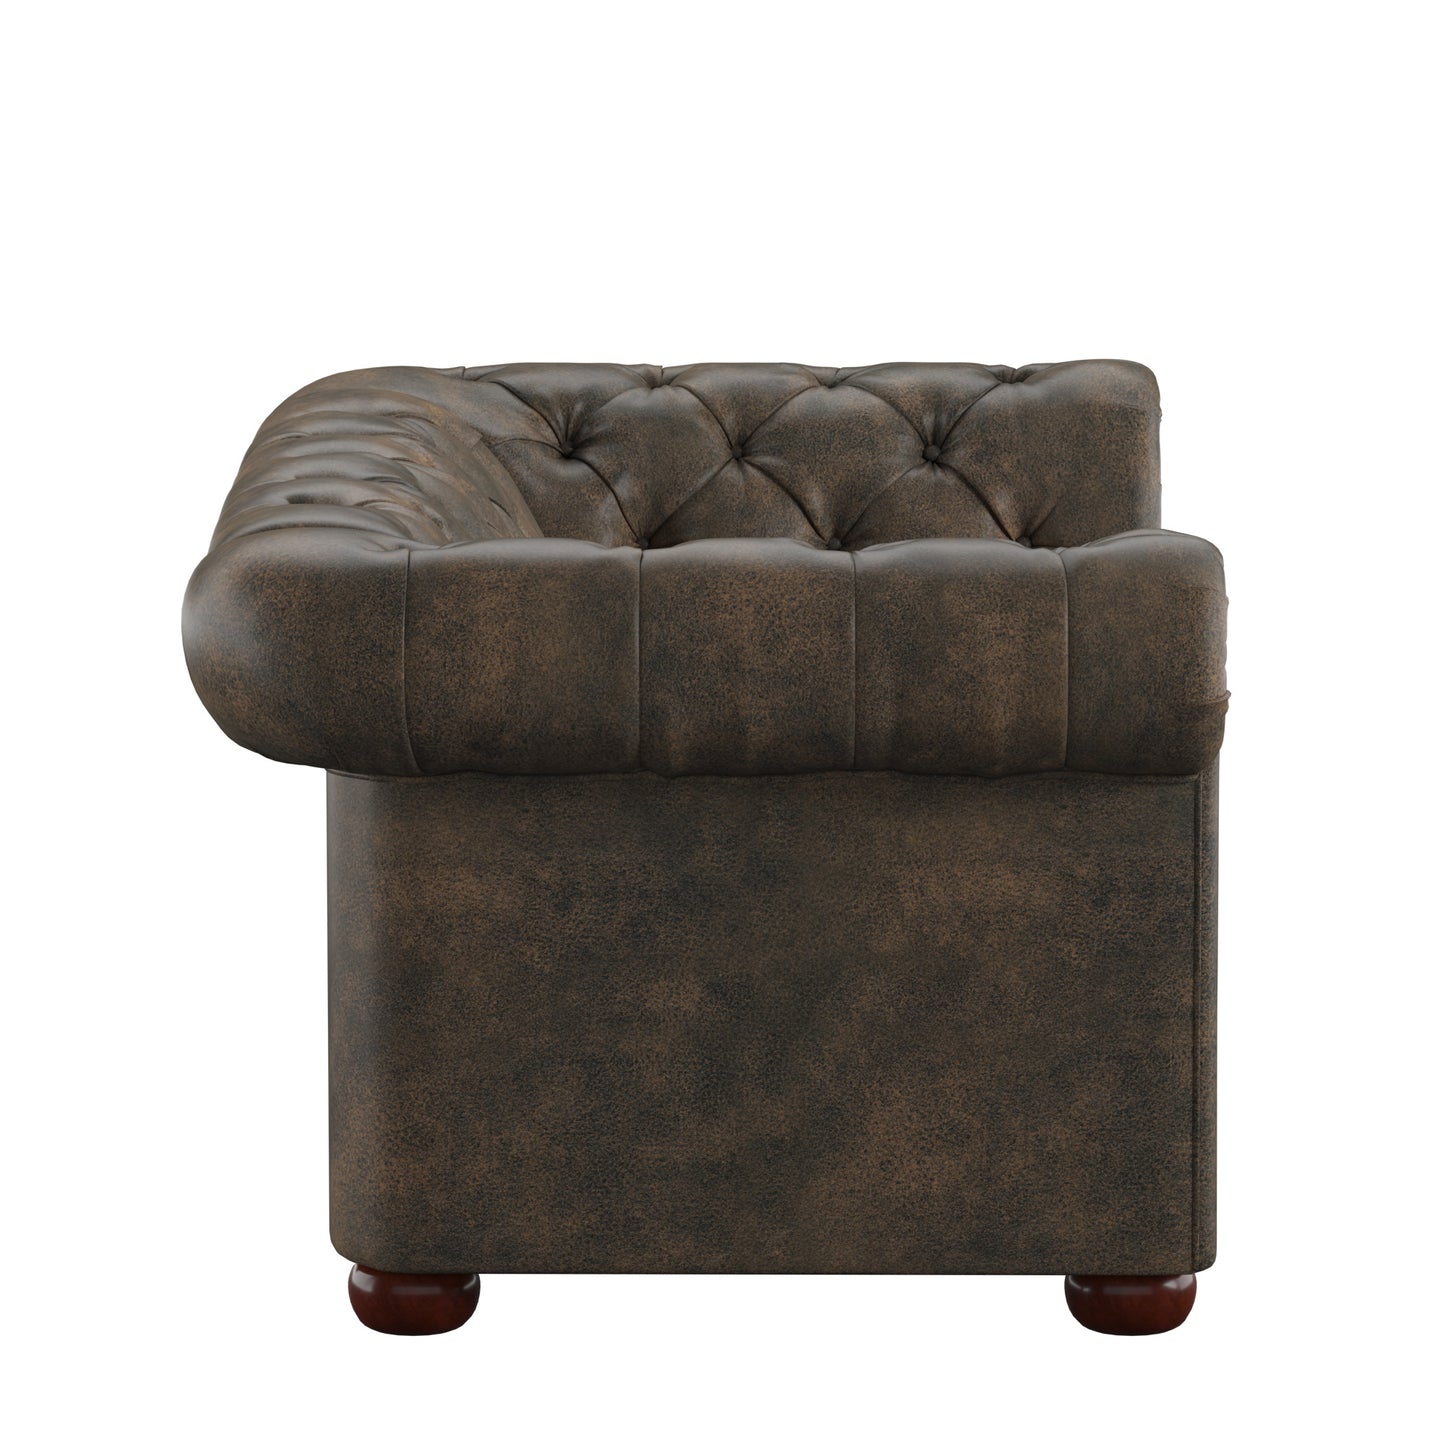 Tufted Chesterfield Loveseat - Brown Polished Microfiber